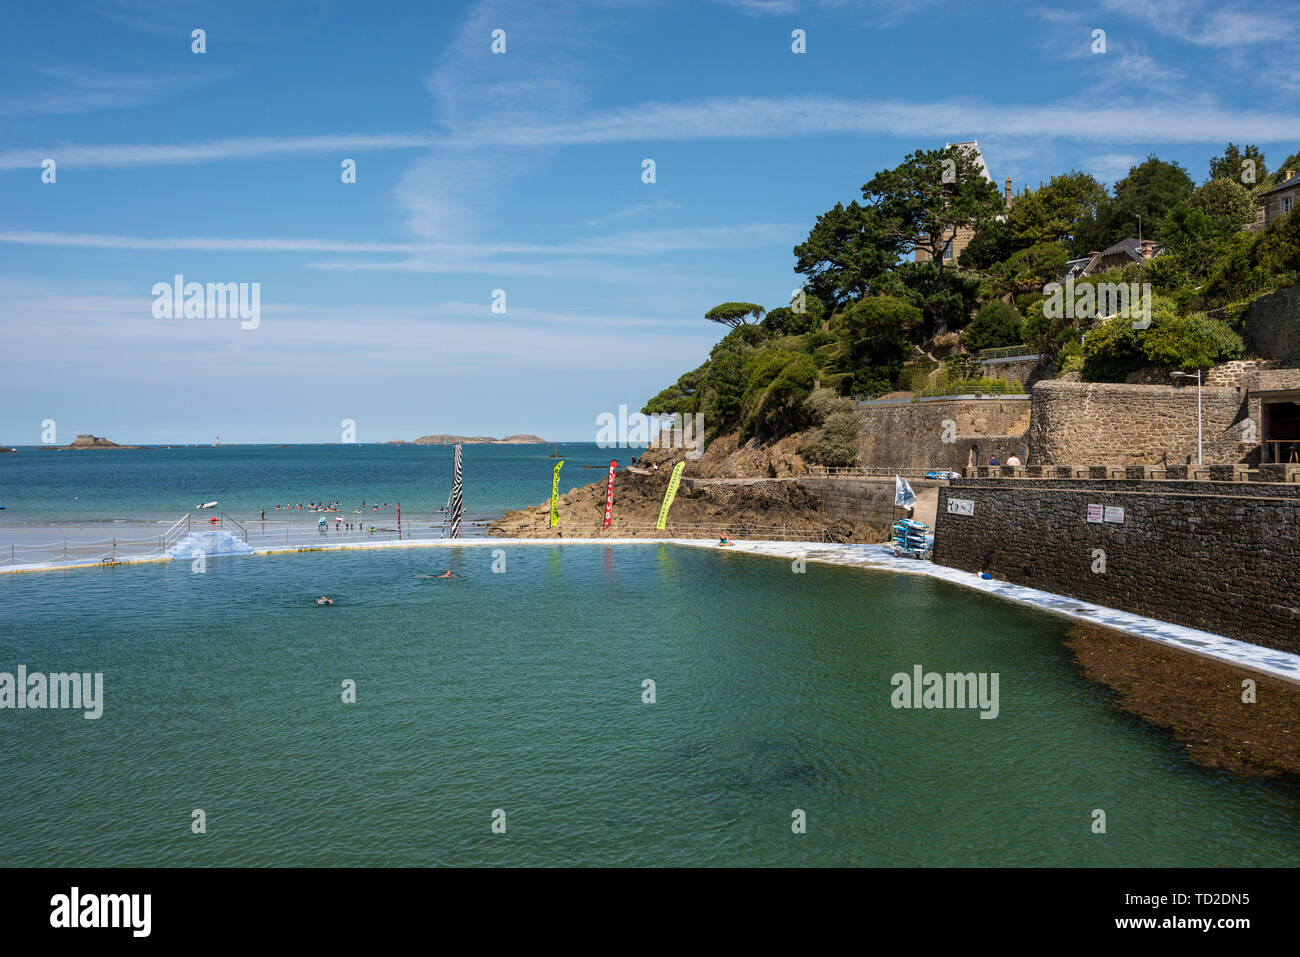 Seawater pool on the beach, Plage de L'Ecluse, Dinard, Brittany, France Stock Photo